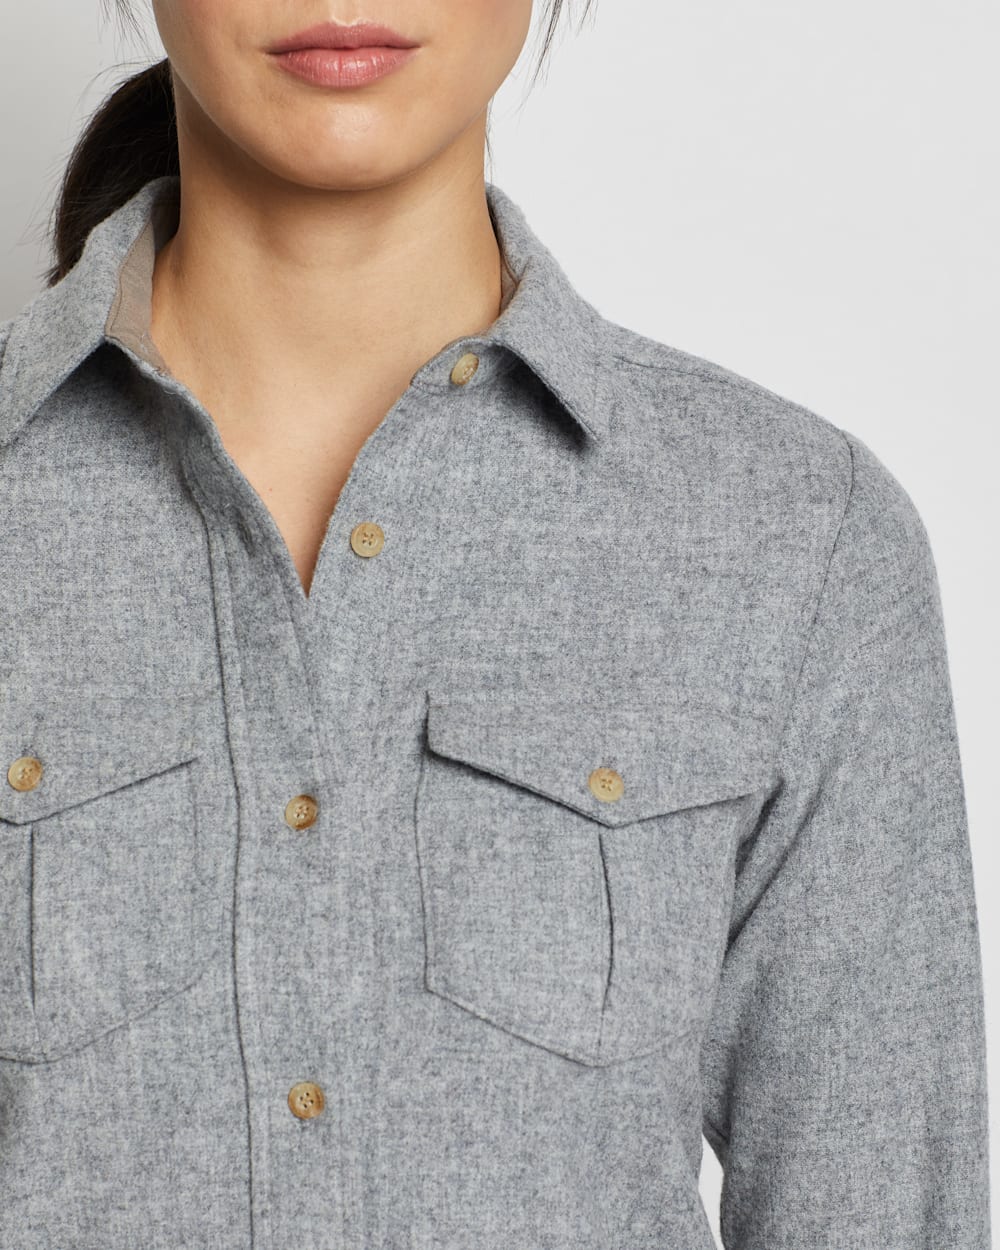 ALTERNATE VIEW OF WOMEN'S LAUREL WOOL SHIRT IN GREY MIX SOLID image number 3